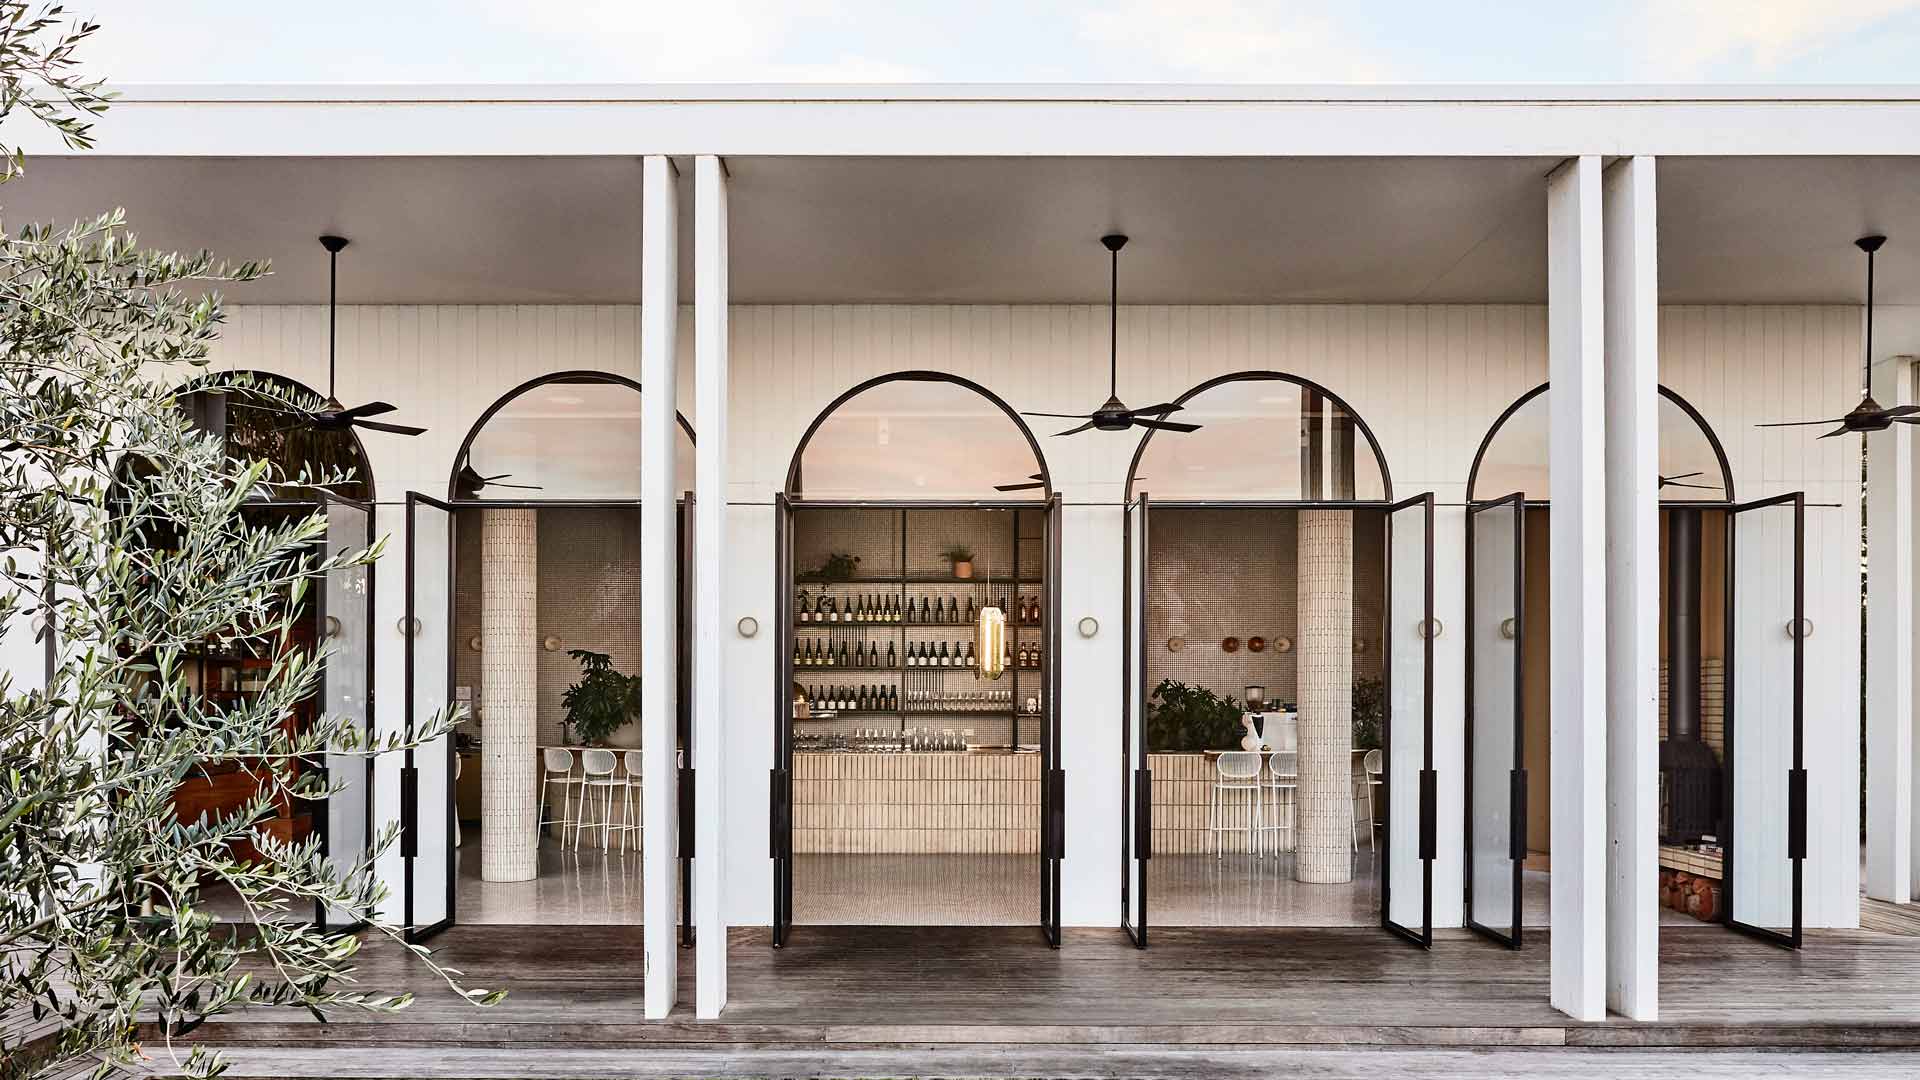 Australia's Most Stunning Venues Have Been Announced at the 2019 Eat Drink Design Awards